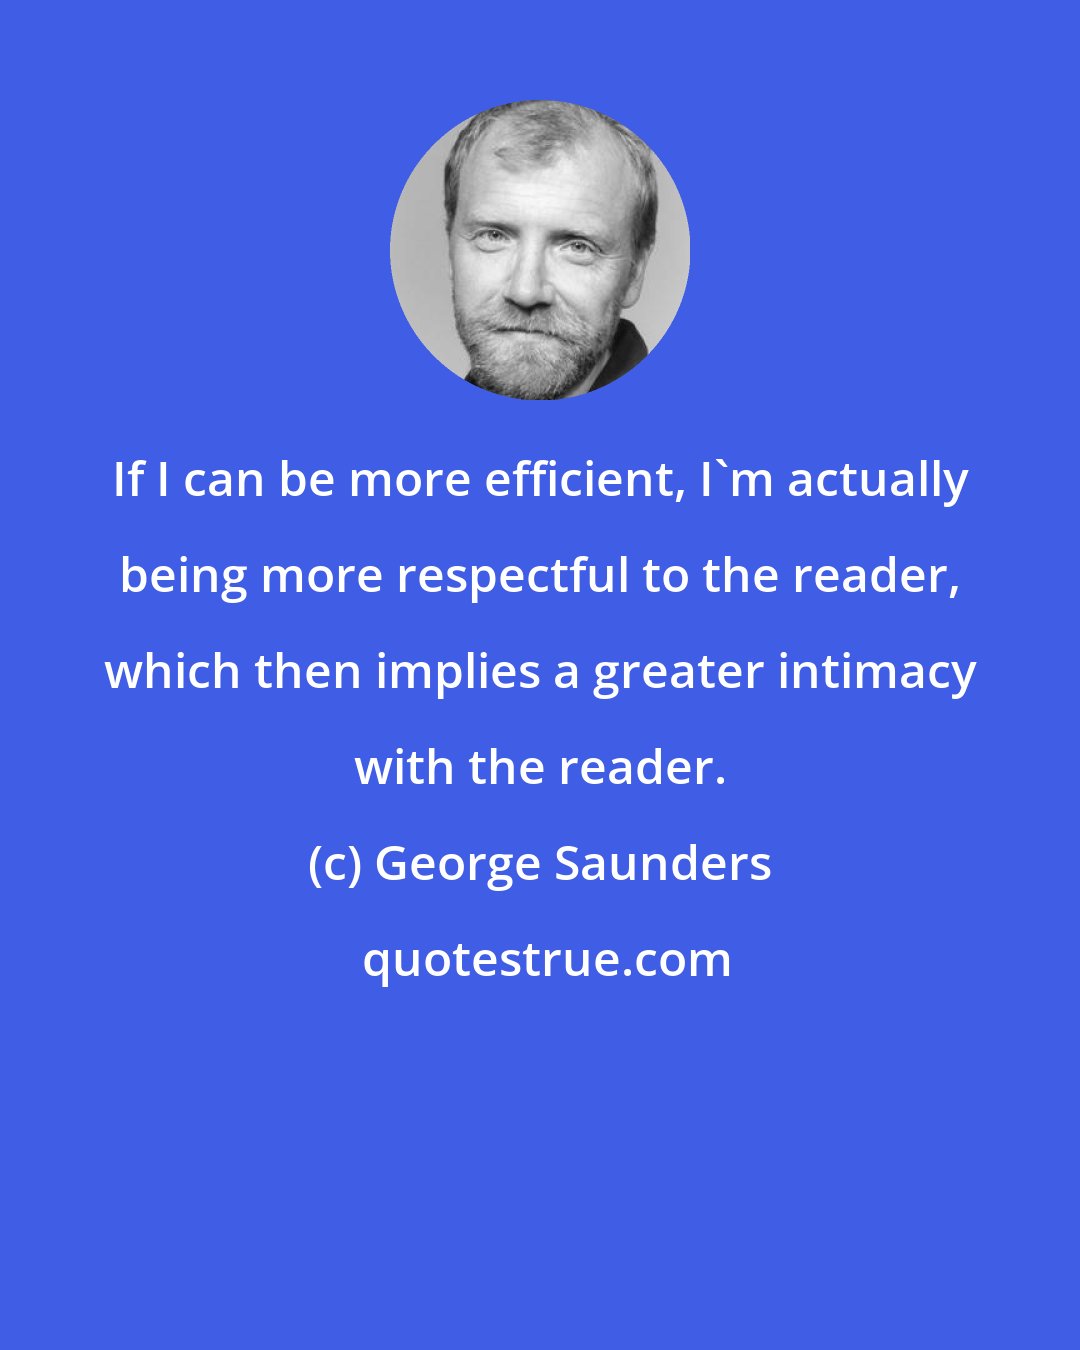 George Saunders: If I can be more efficient, I'm actually being more respectful to the reader, which then implies a greater intimacy with the reader.